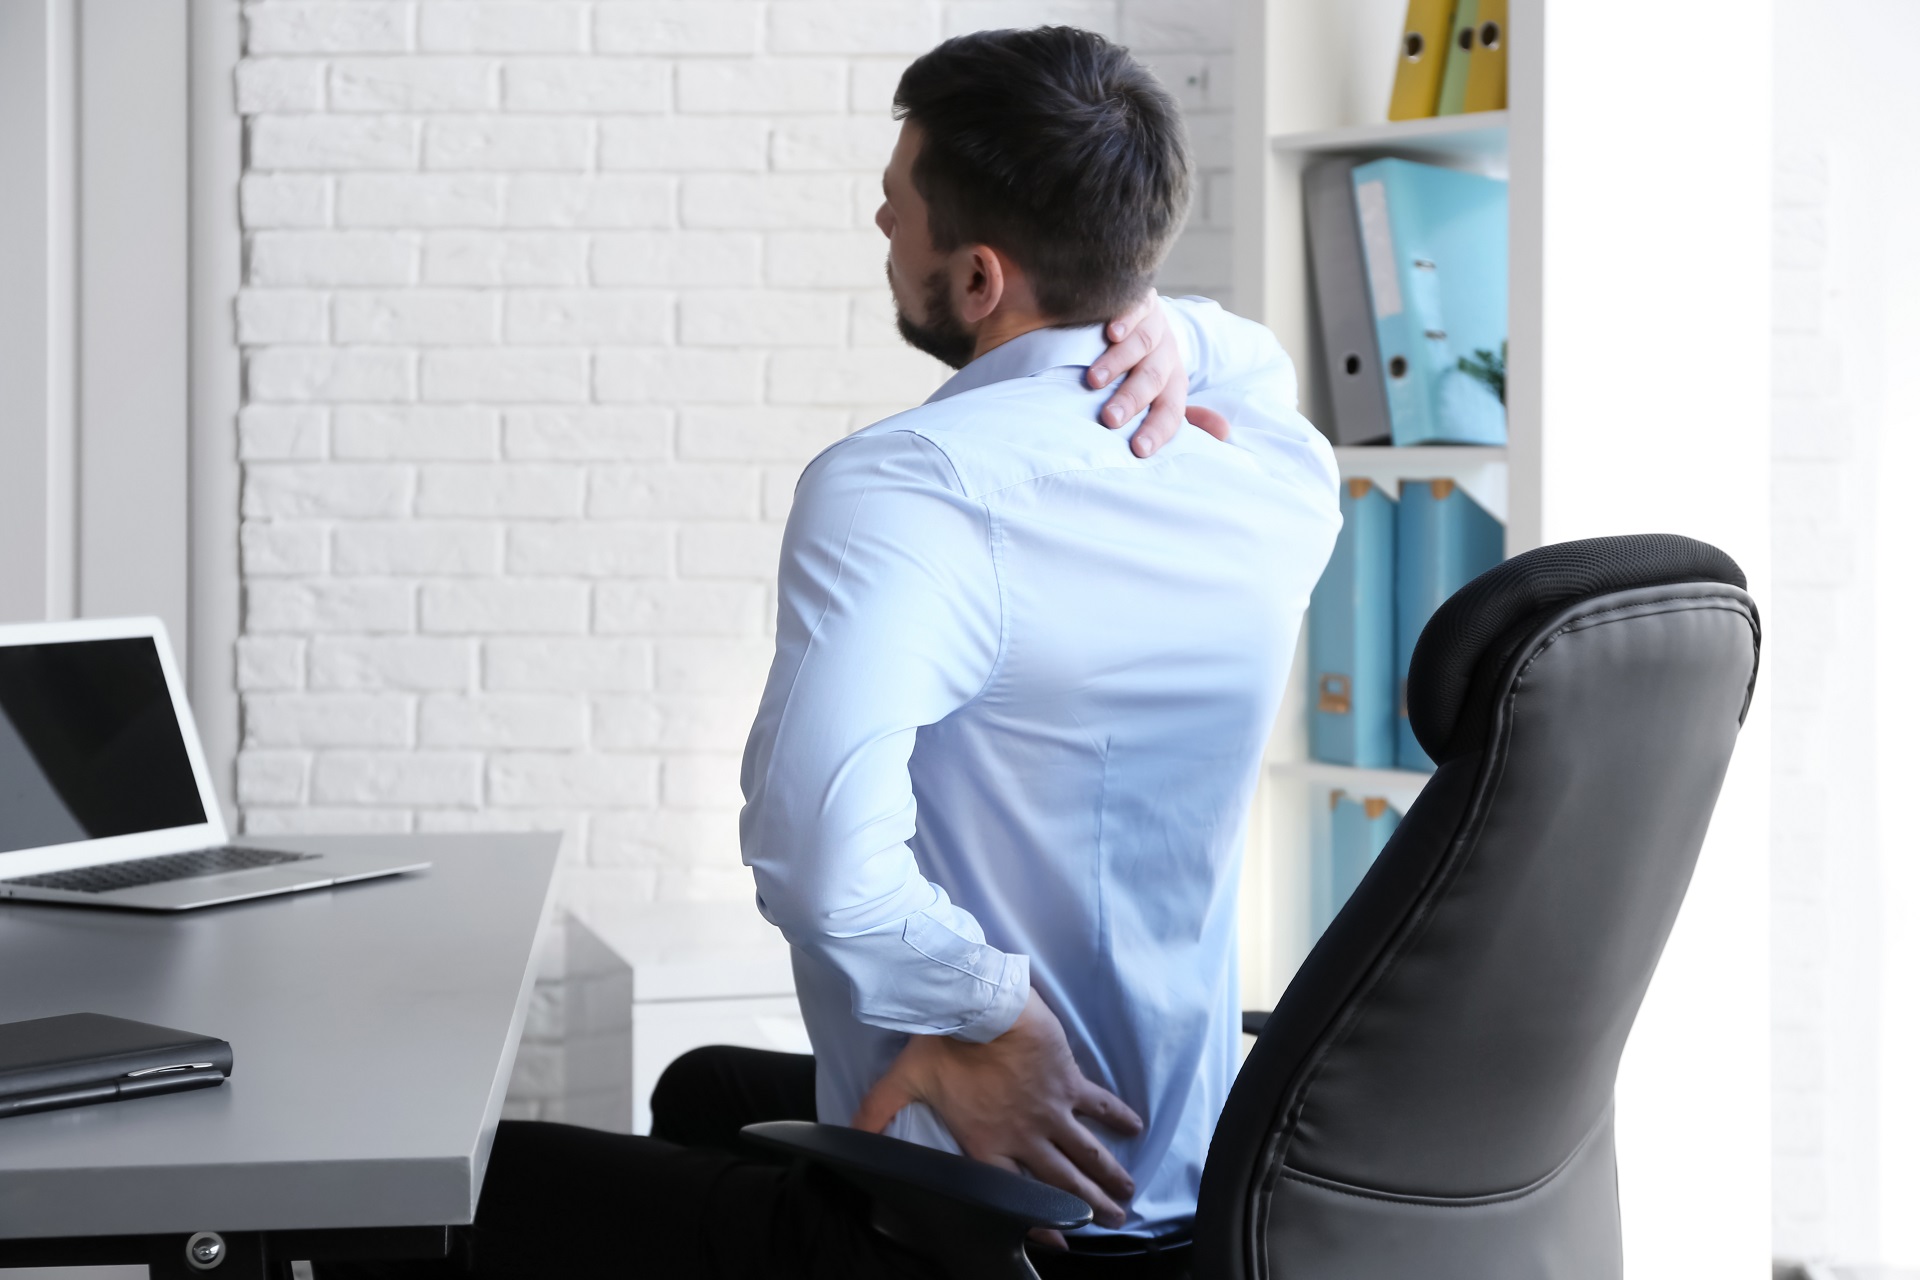 Maintain the right posture